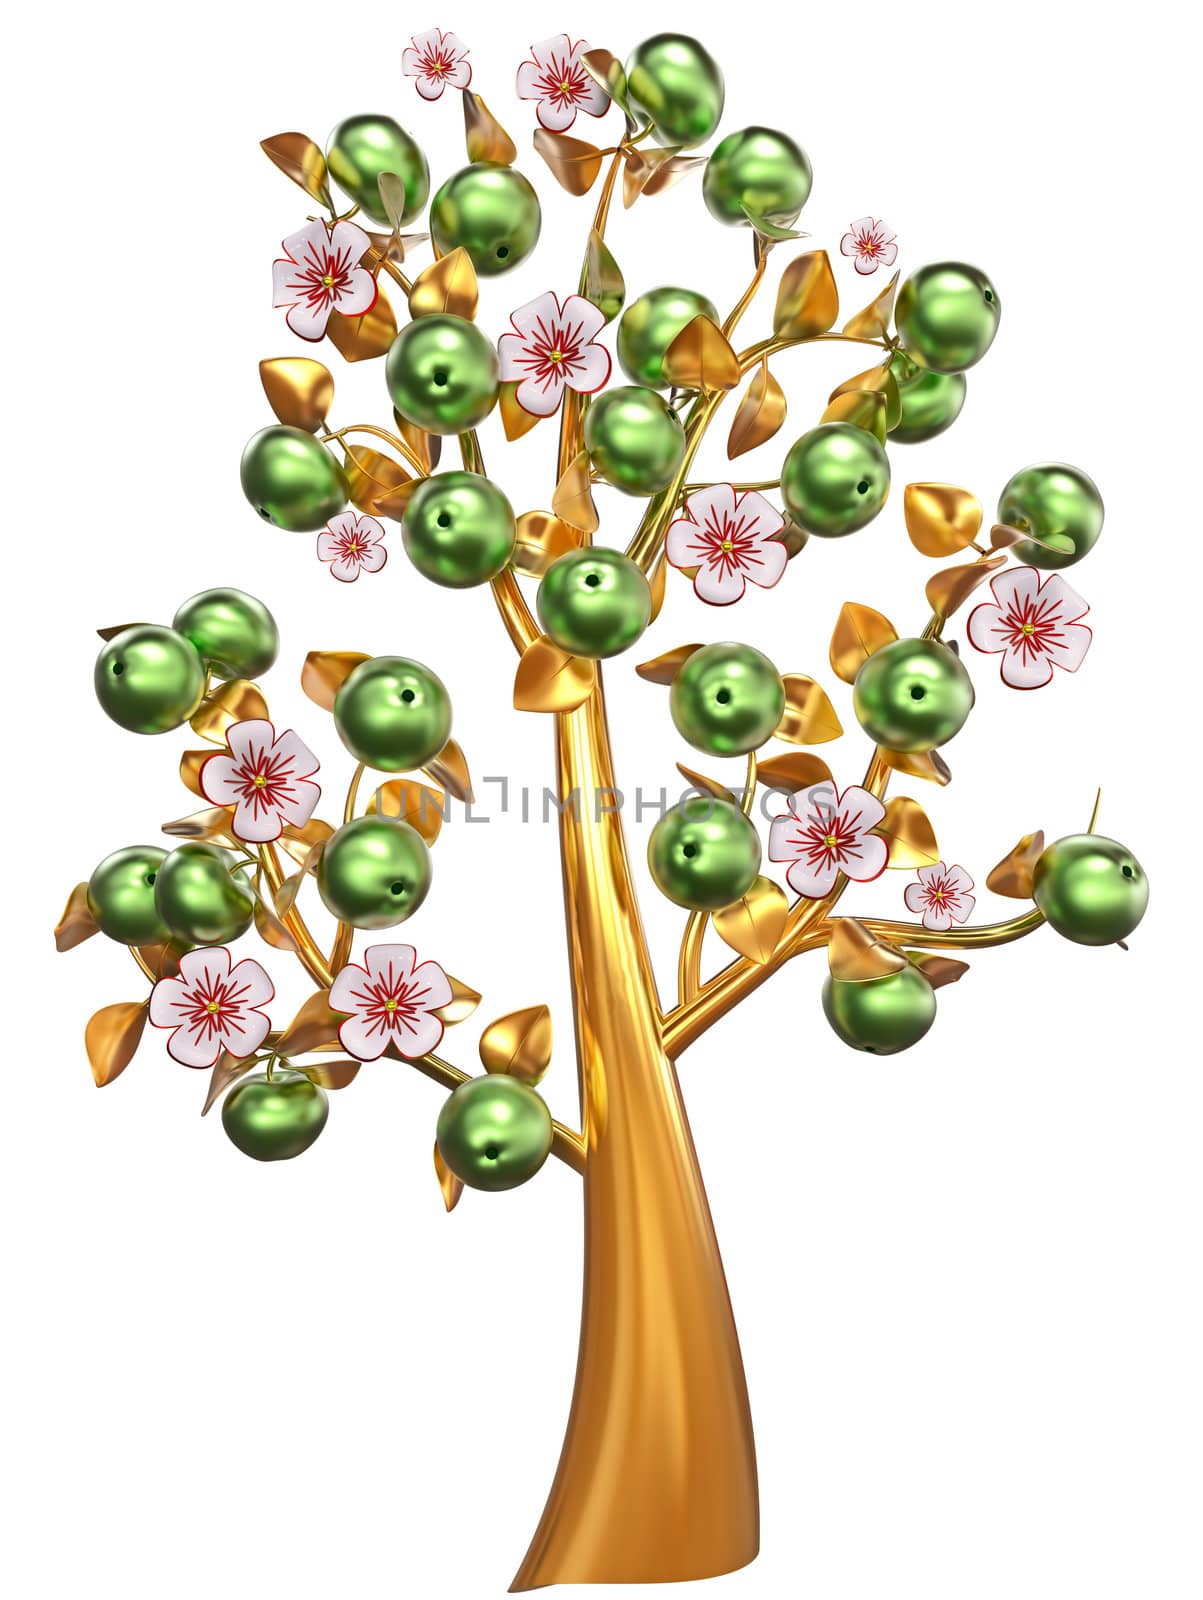 Beautiful golden apple-tree with impressive green apples, white flowers and golden leaves as jewelry